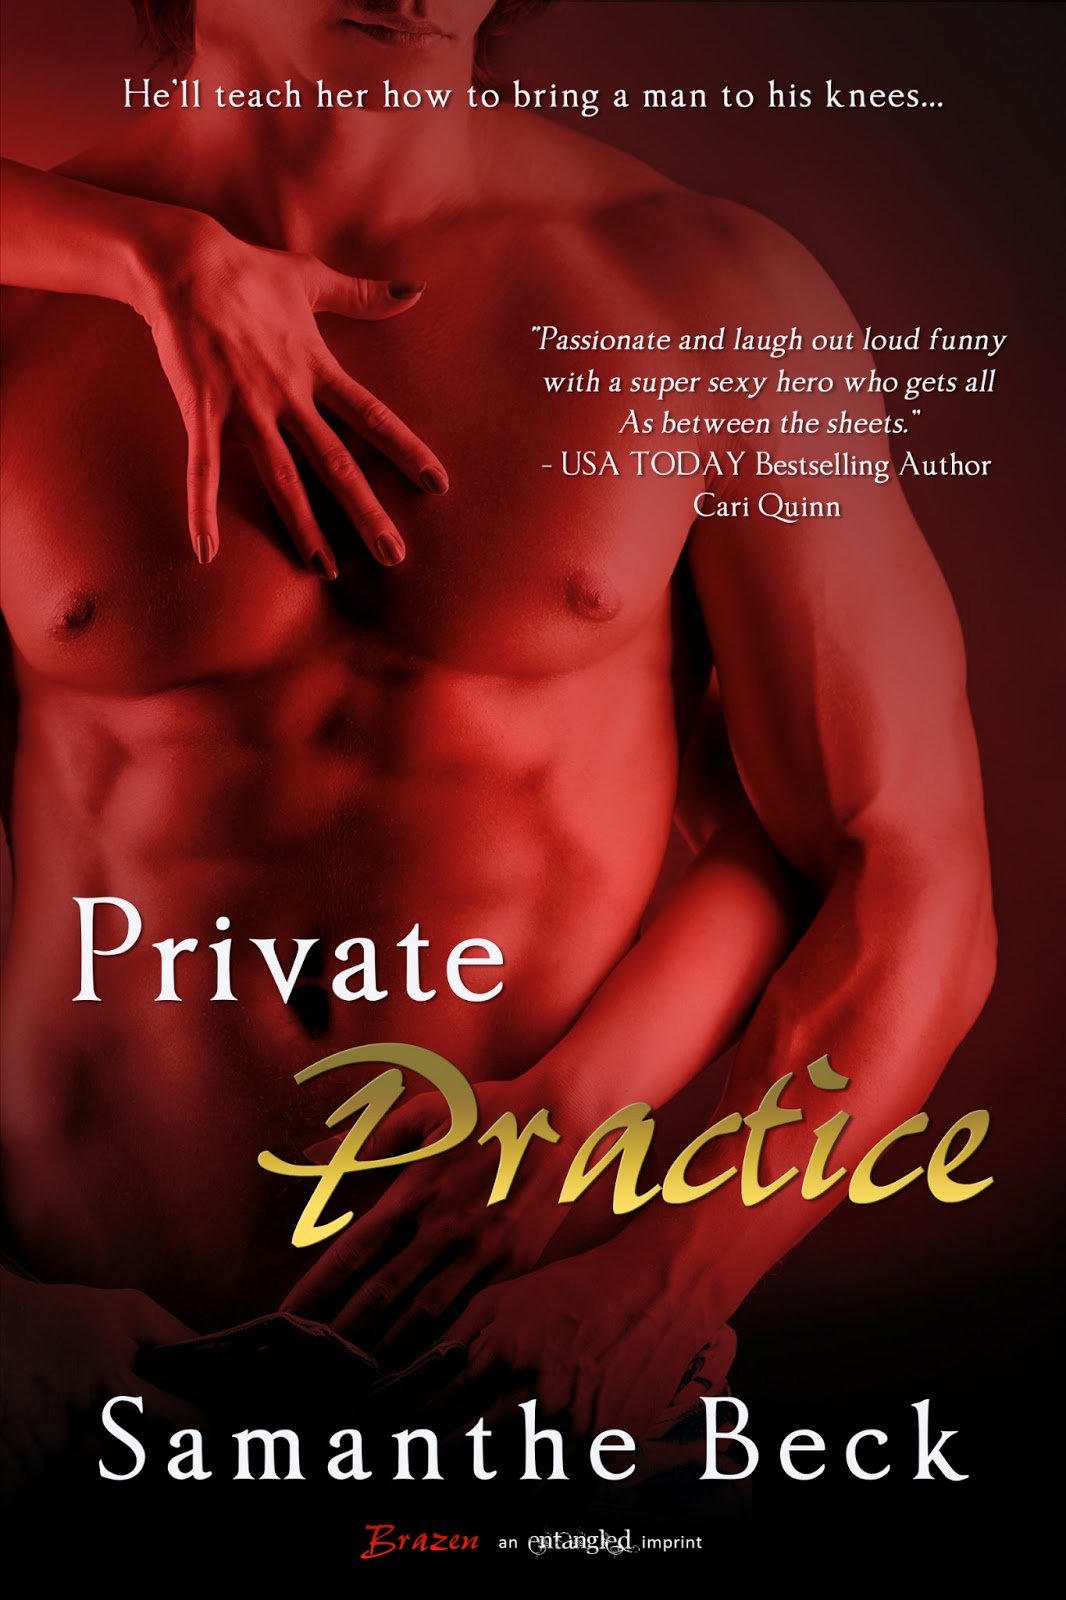 Review: Private Practice by Samantha Beck